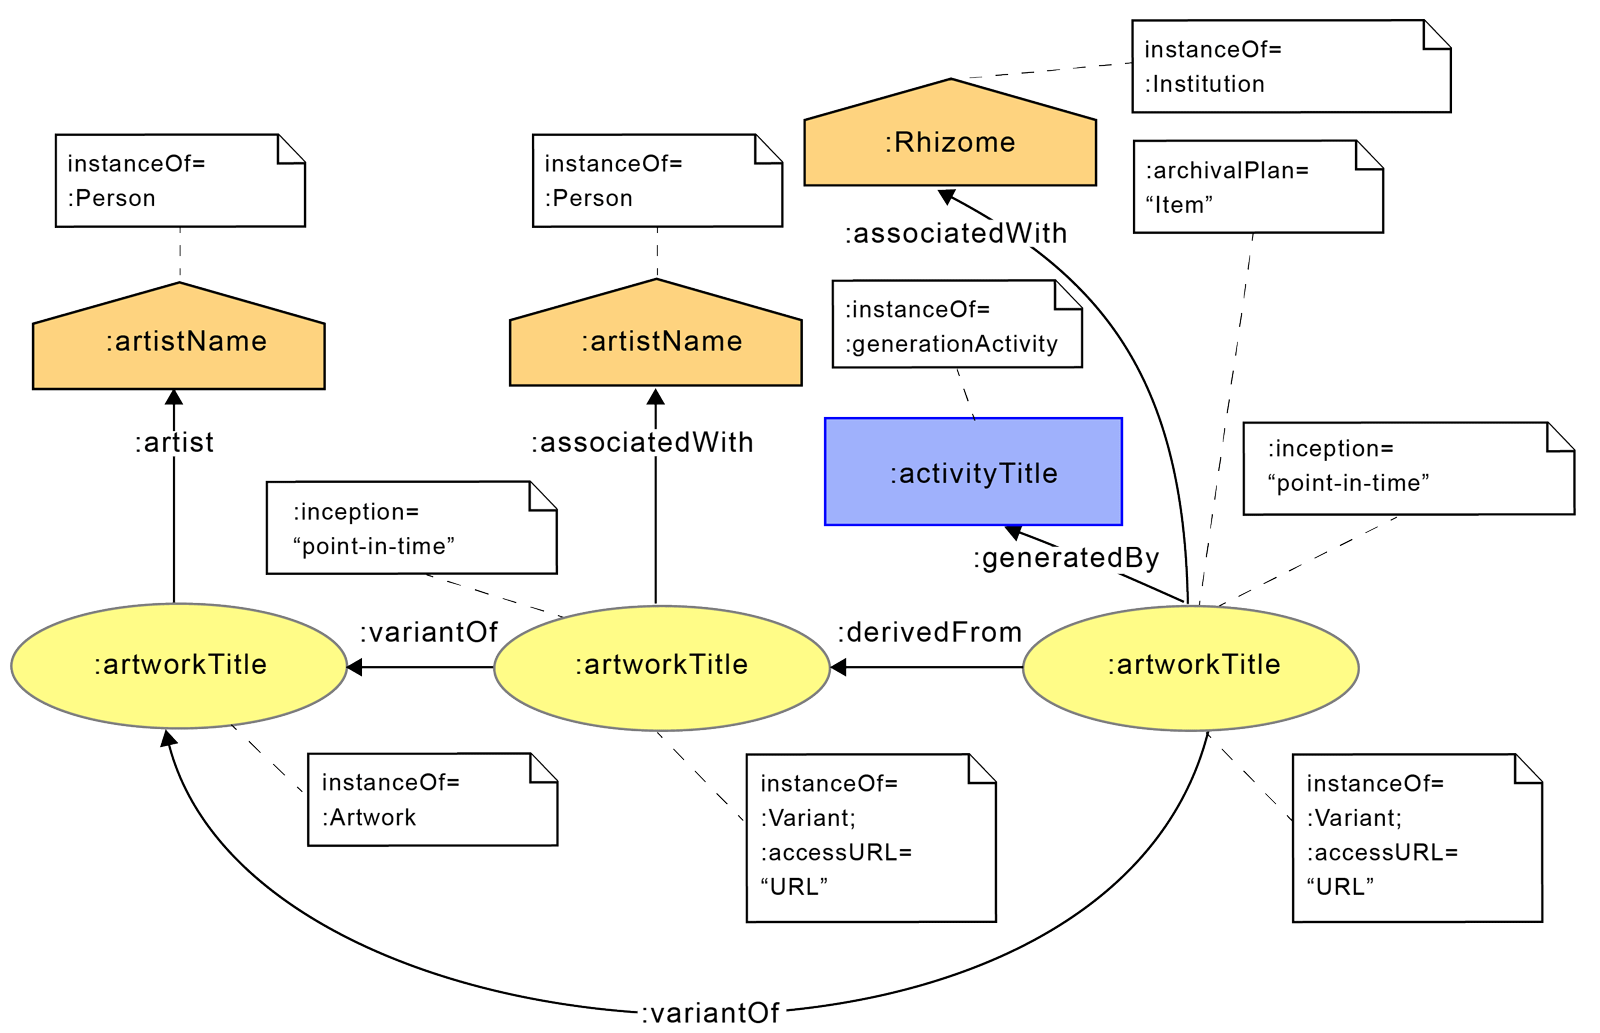 A diagram depicting key metadata elements of the PROV model for provenance data.